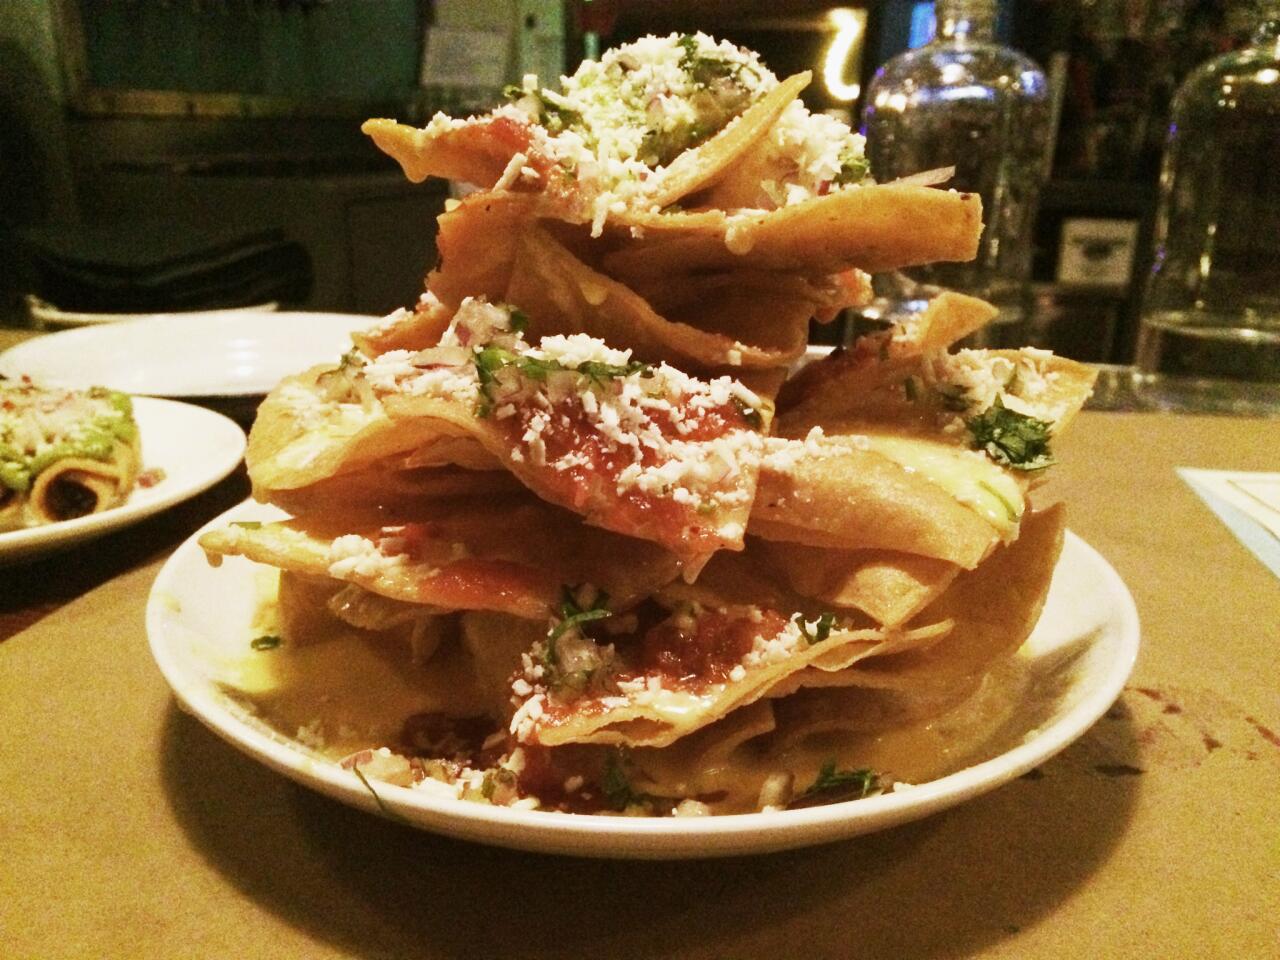 The $5 queso nachos from Bar Ama are available during the restaurant's happy hour, also known as Super Nacho Hour.